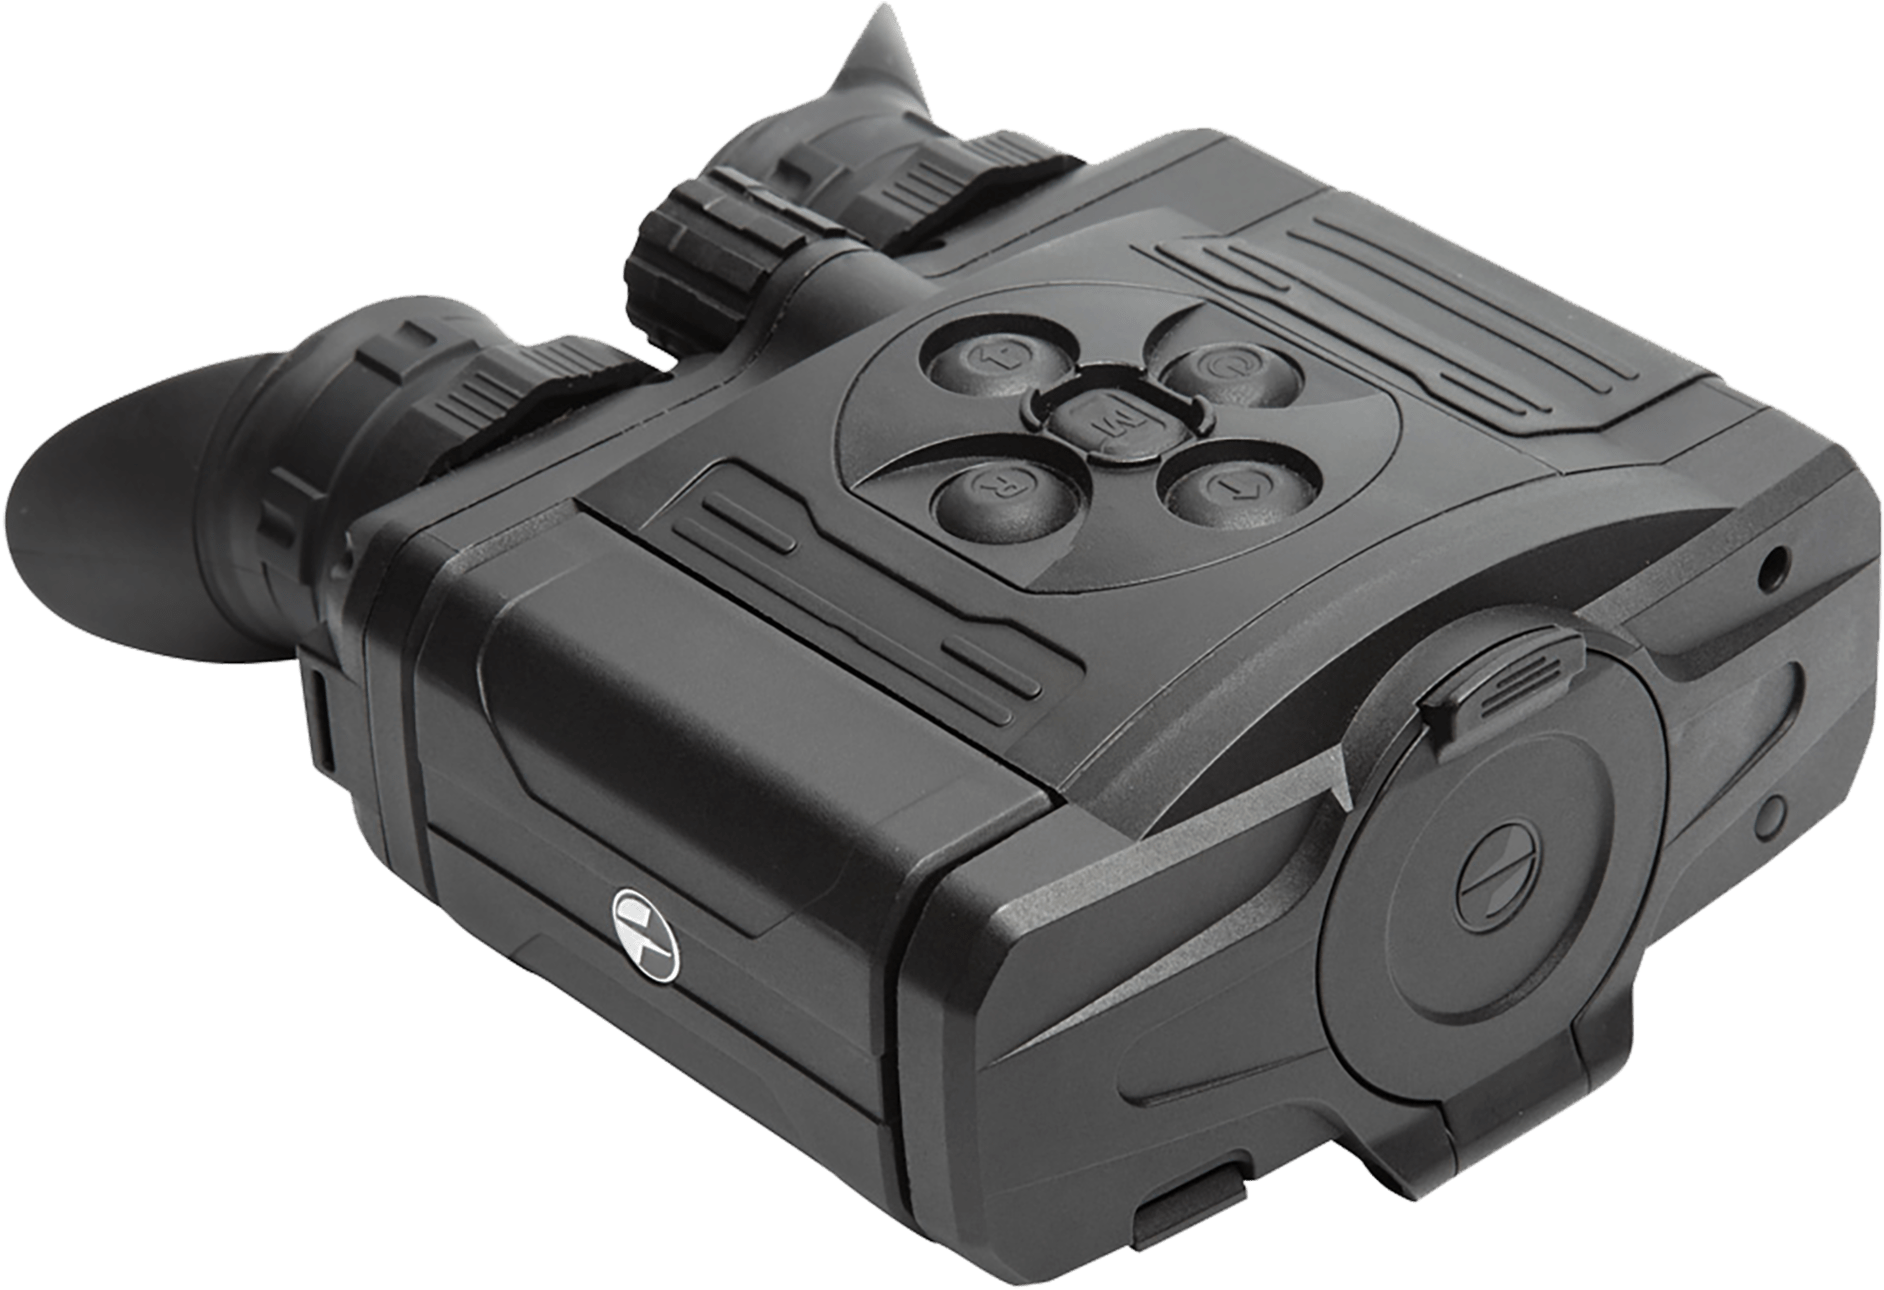 Accolade Xq38 Front Right View - Binoculars (1920x1920), Png Download